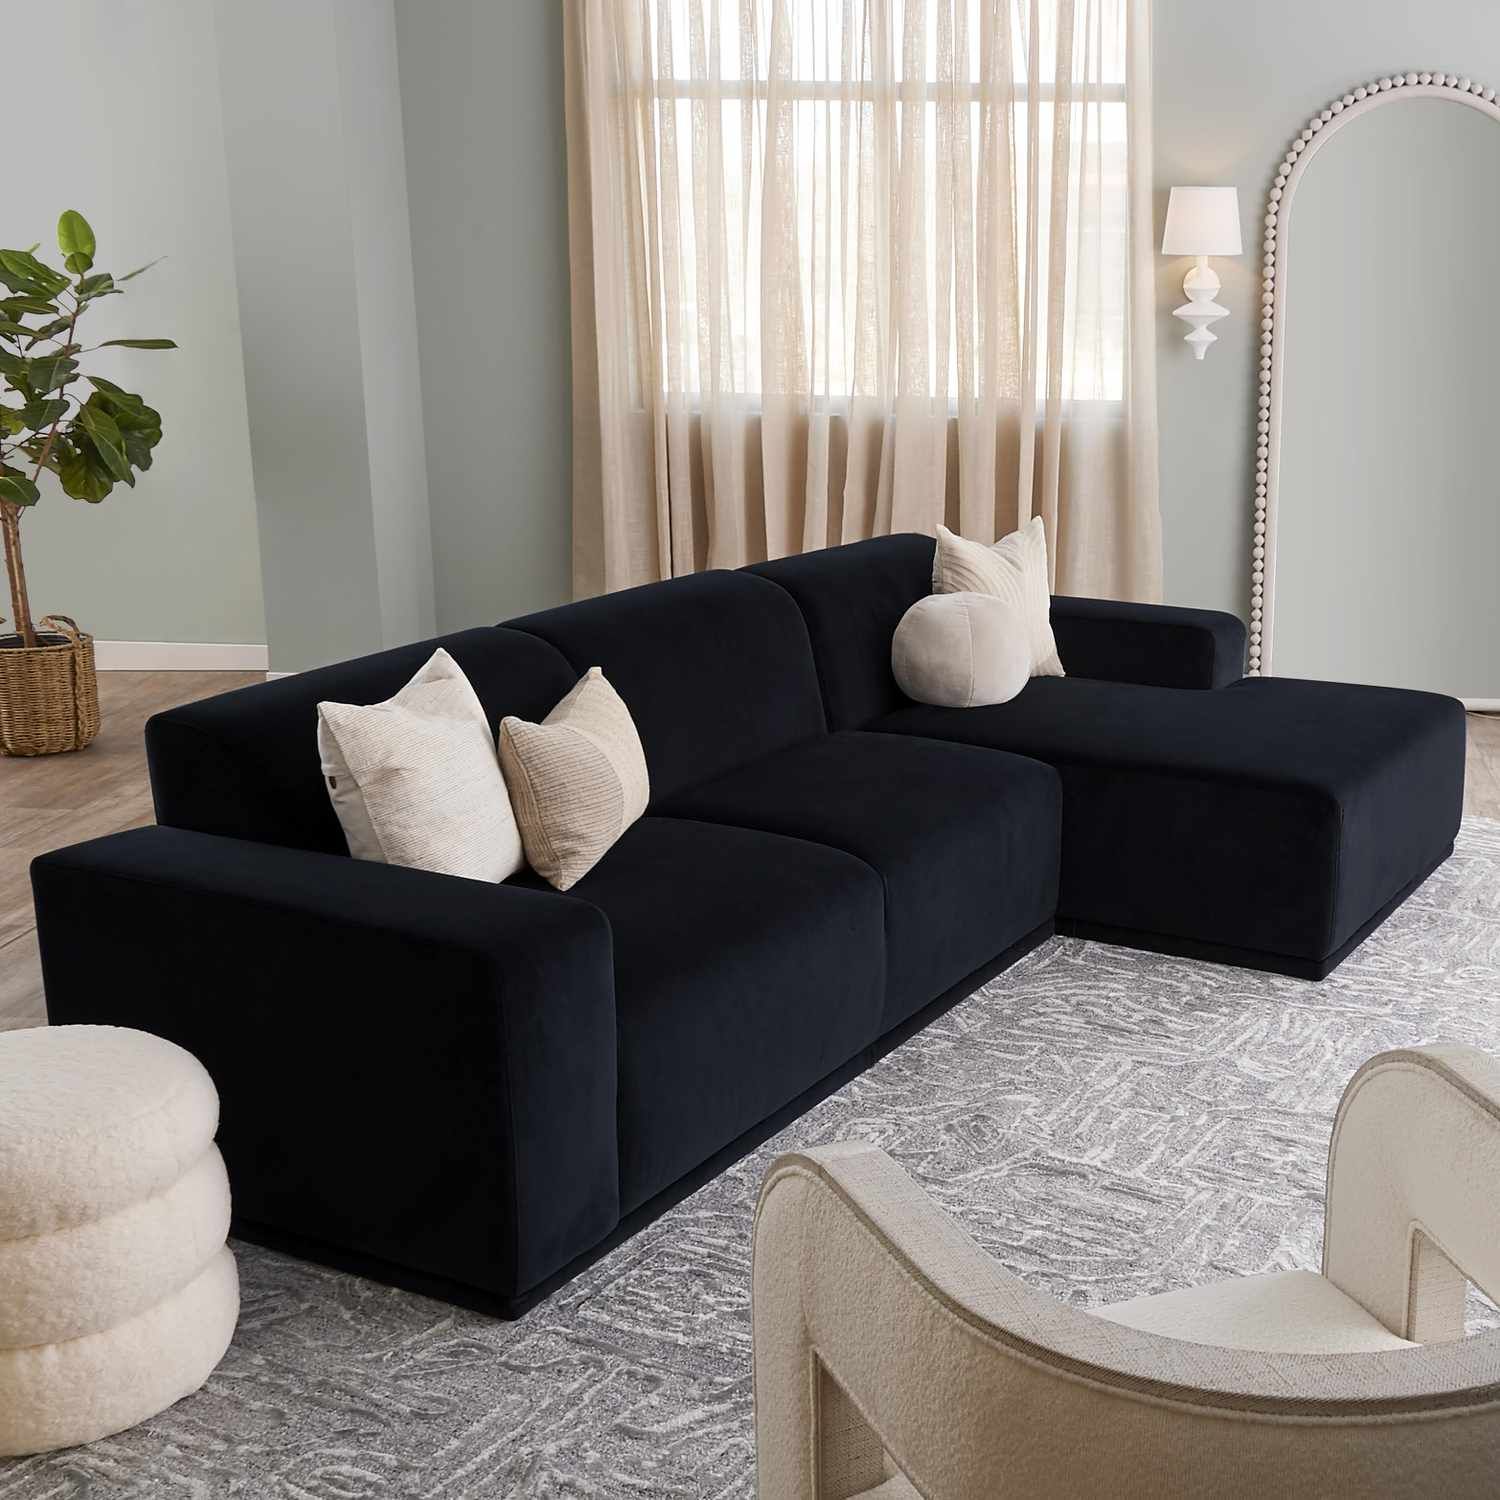 41 Living Room Ideas With Black Couches, From Neutral To Bold With Sofas In Black (Photo 11 of 15)